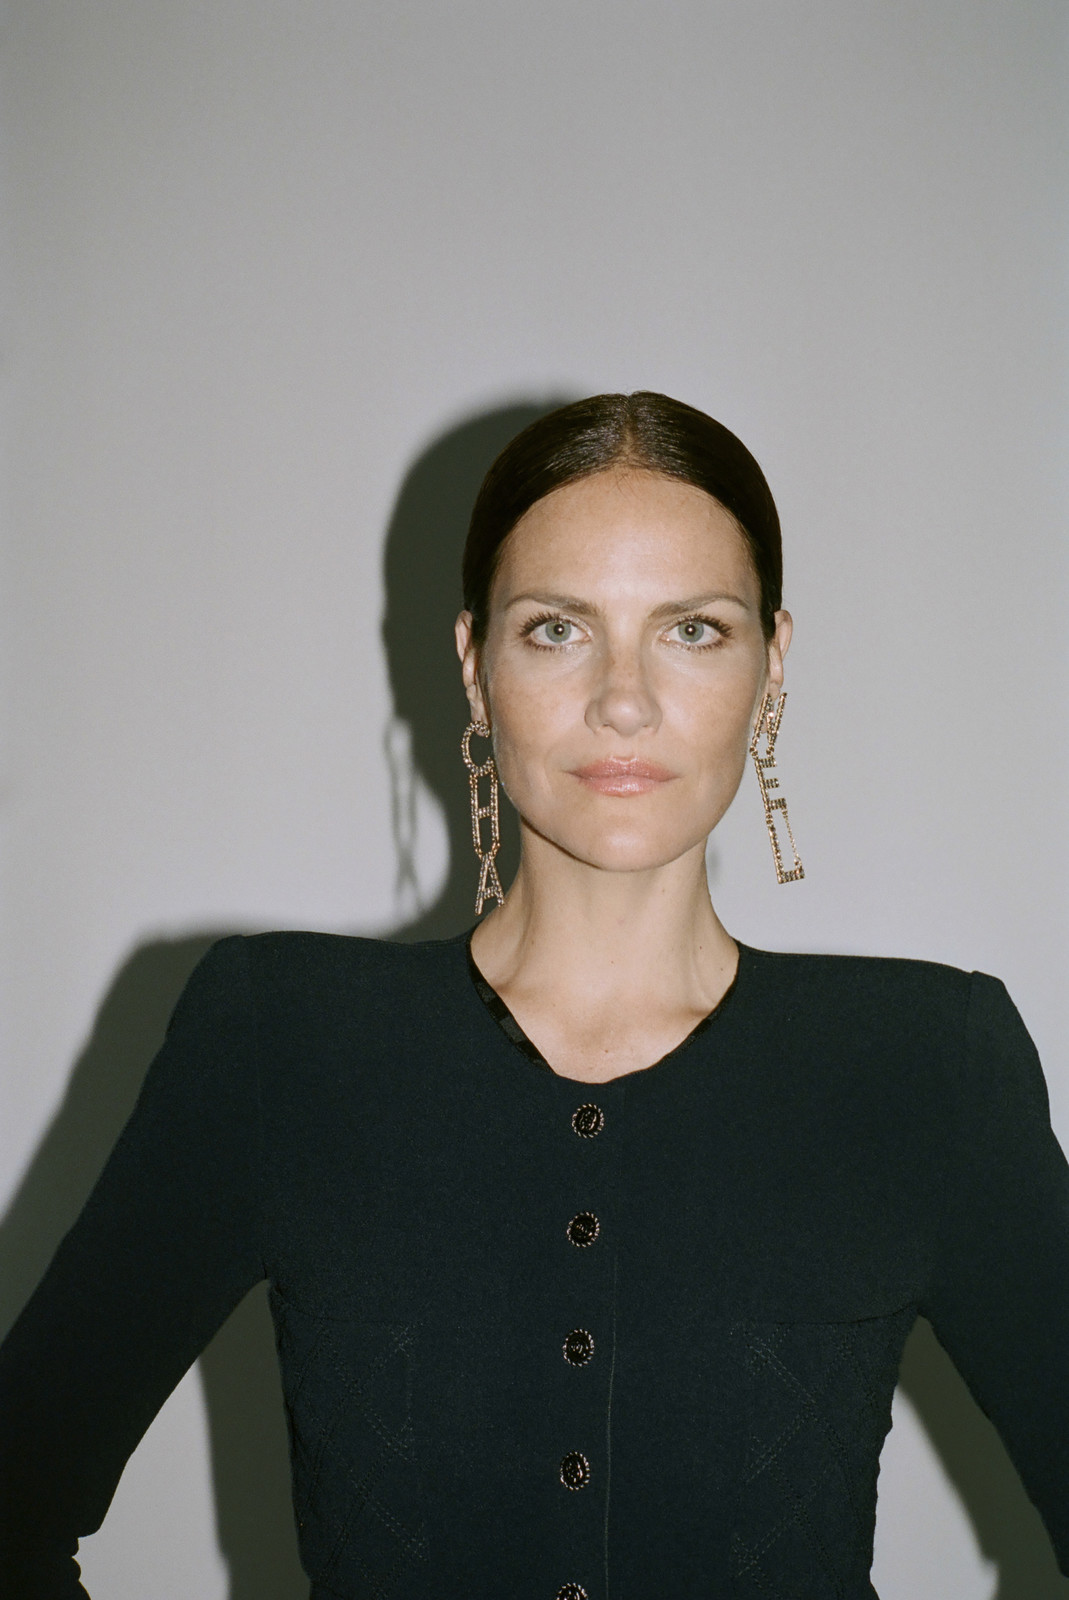 Hello Missy Rayder - Love Want